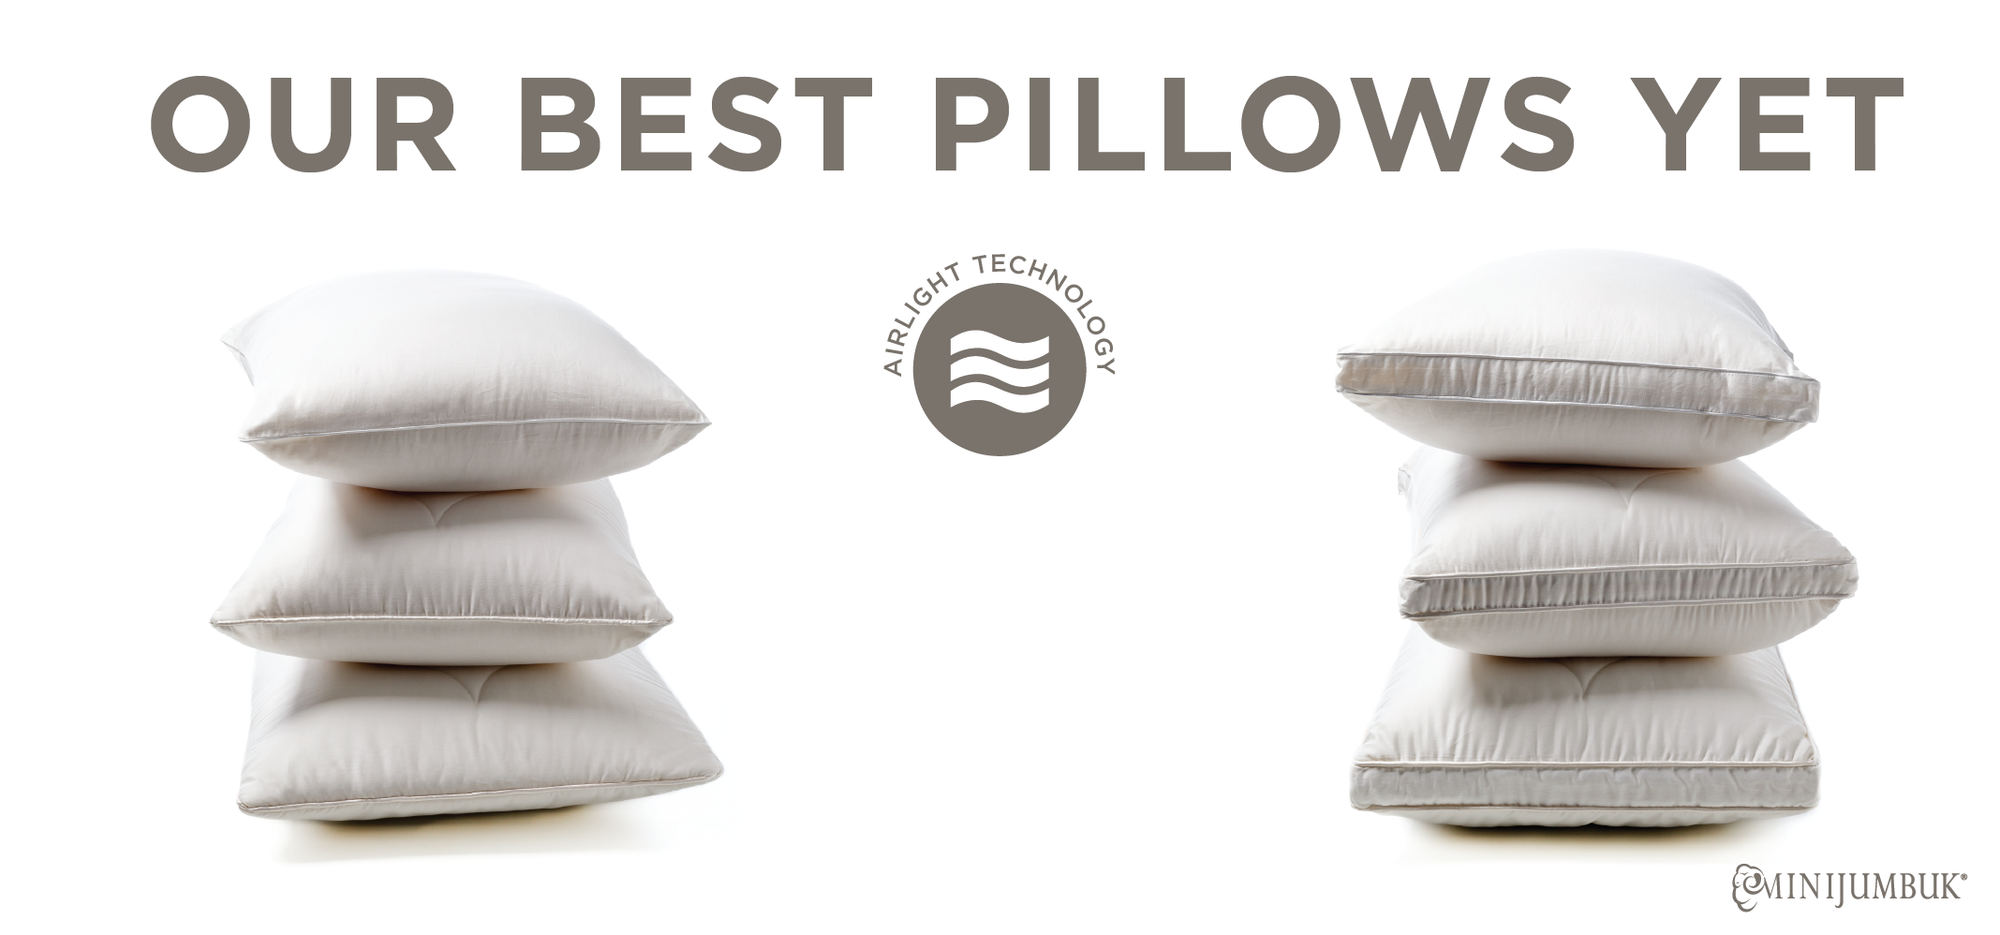 Our Best Pillows Yet